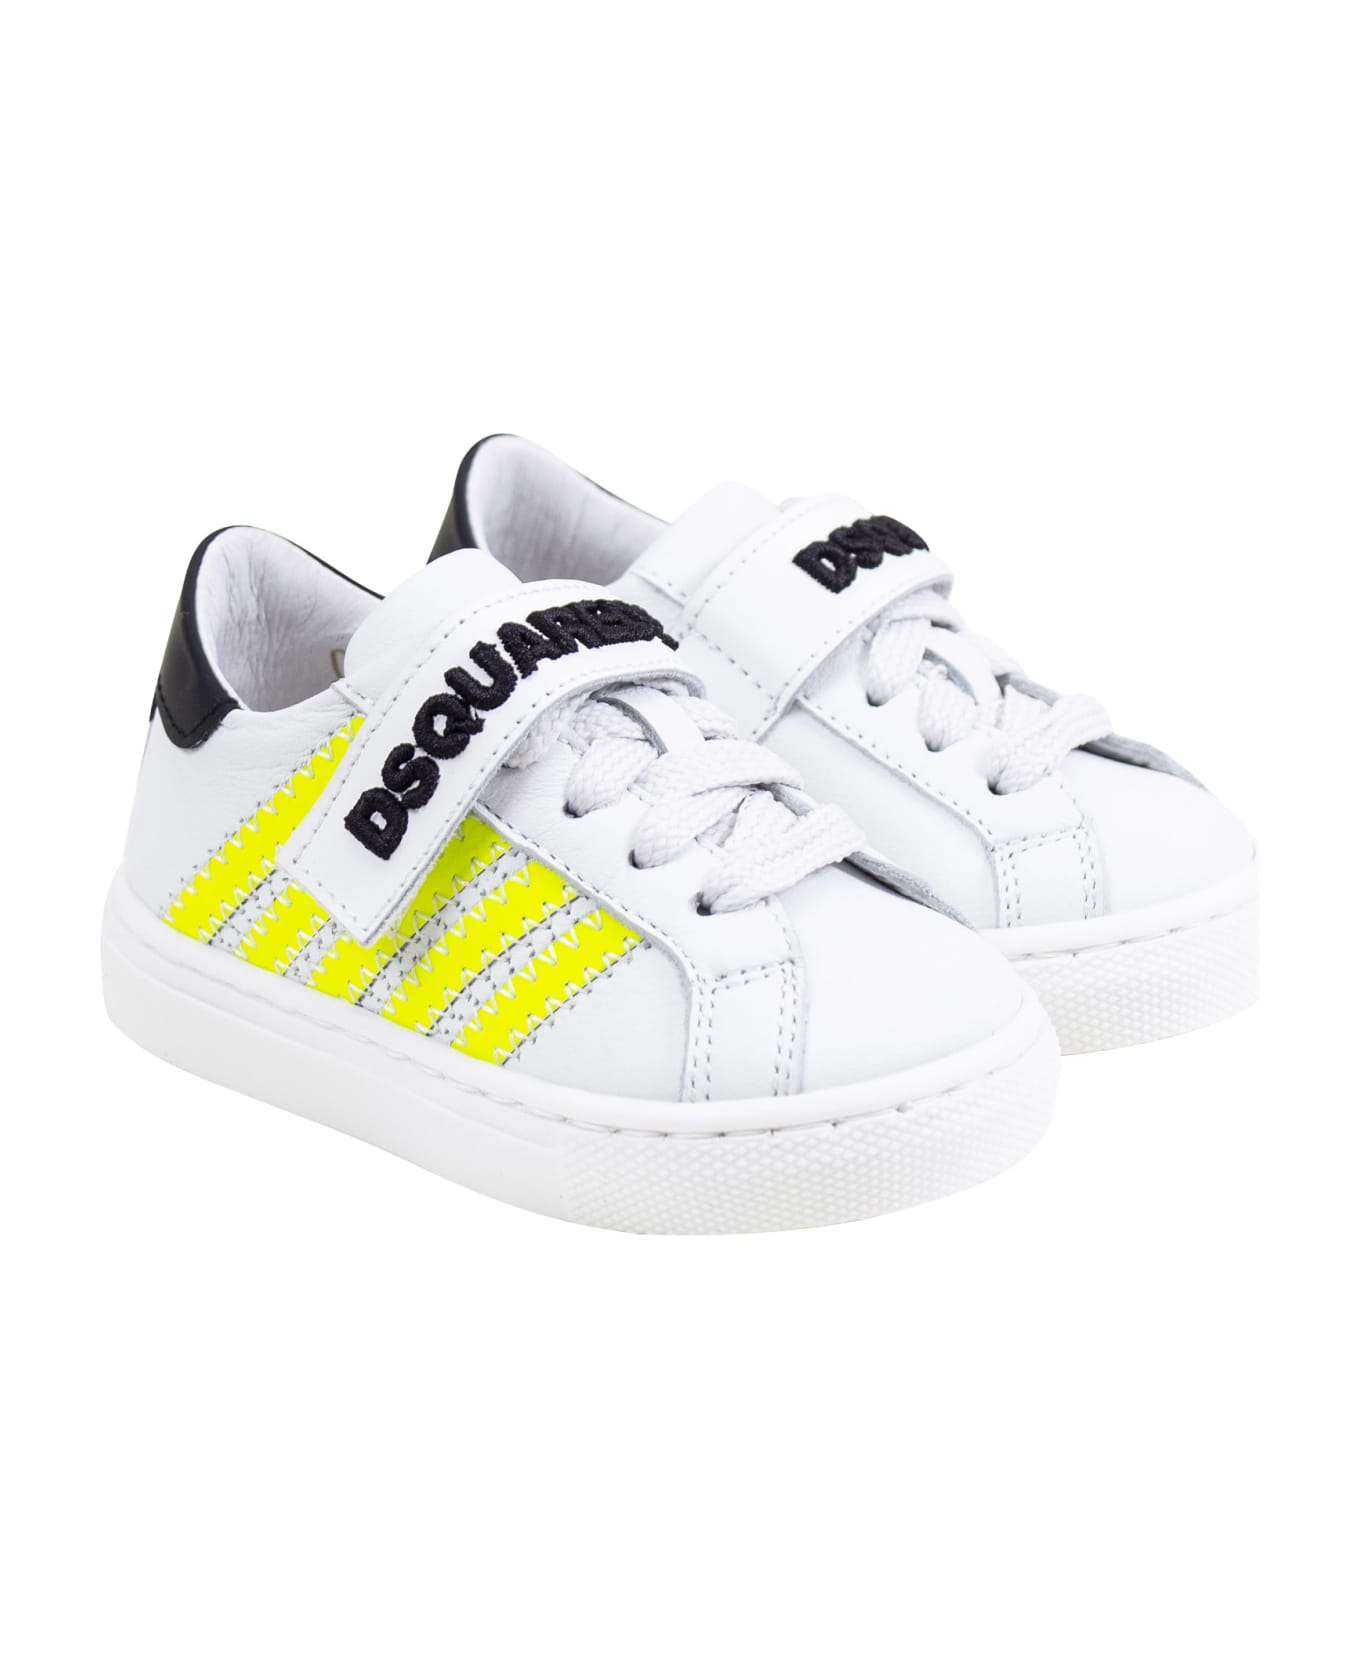 Dsquared2 Child Sneakers - Variante unica シューズ